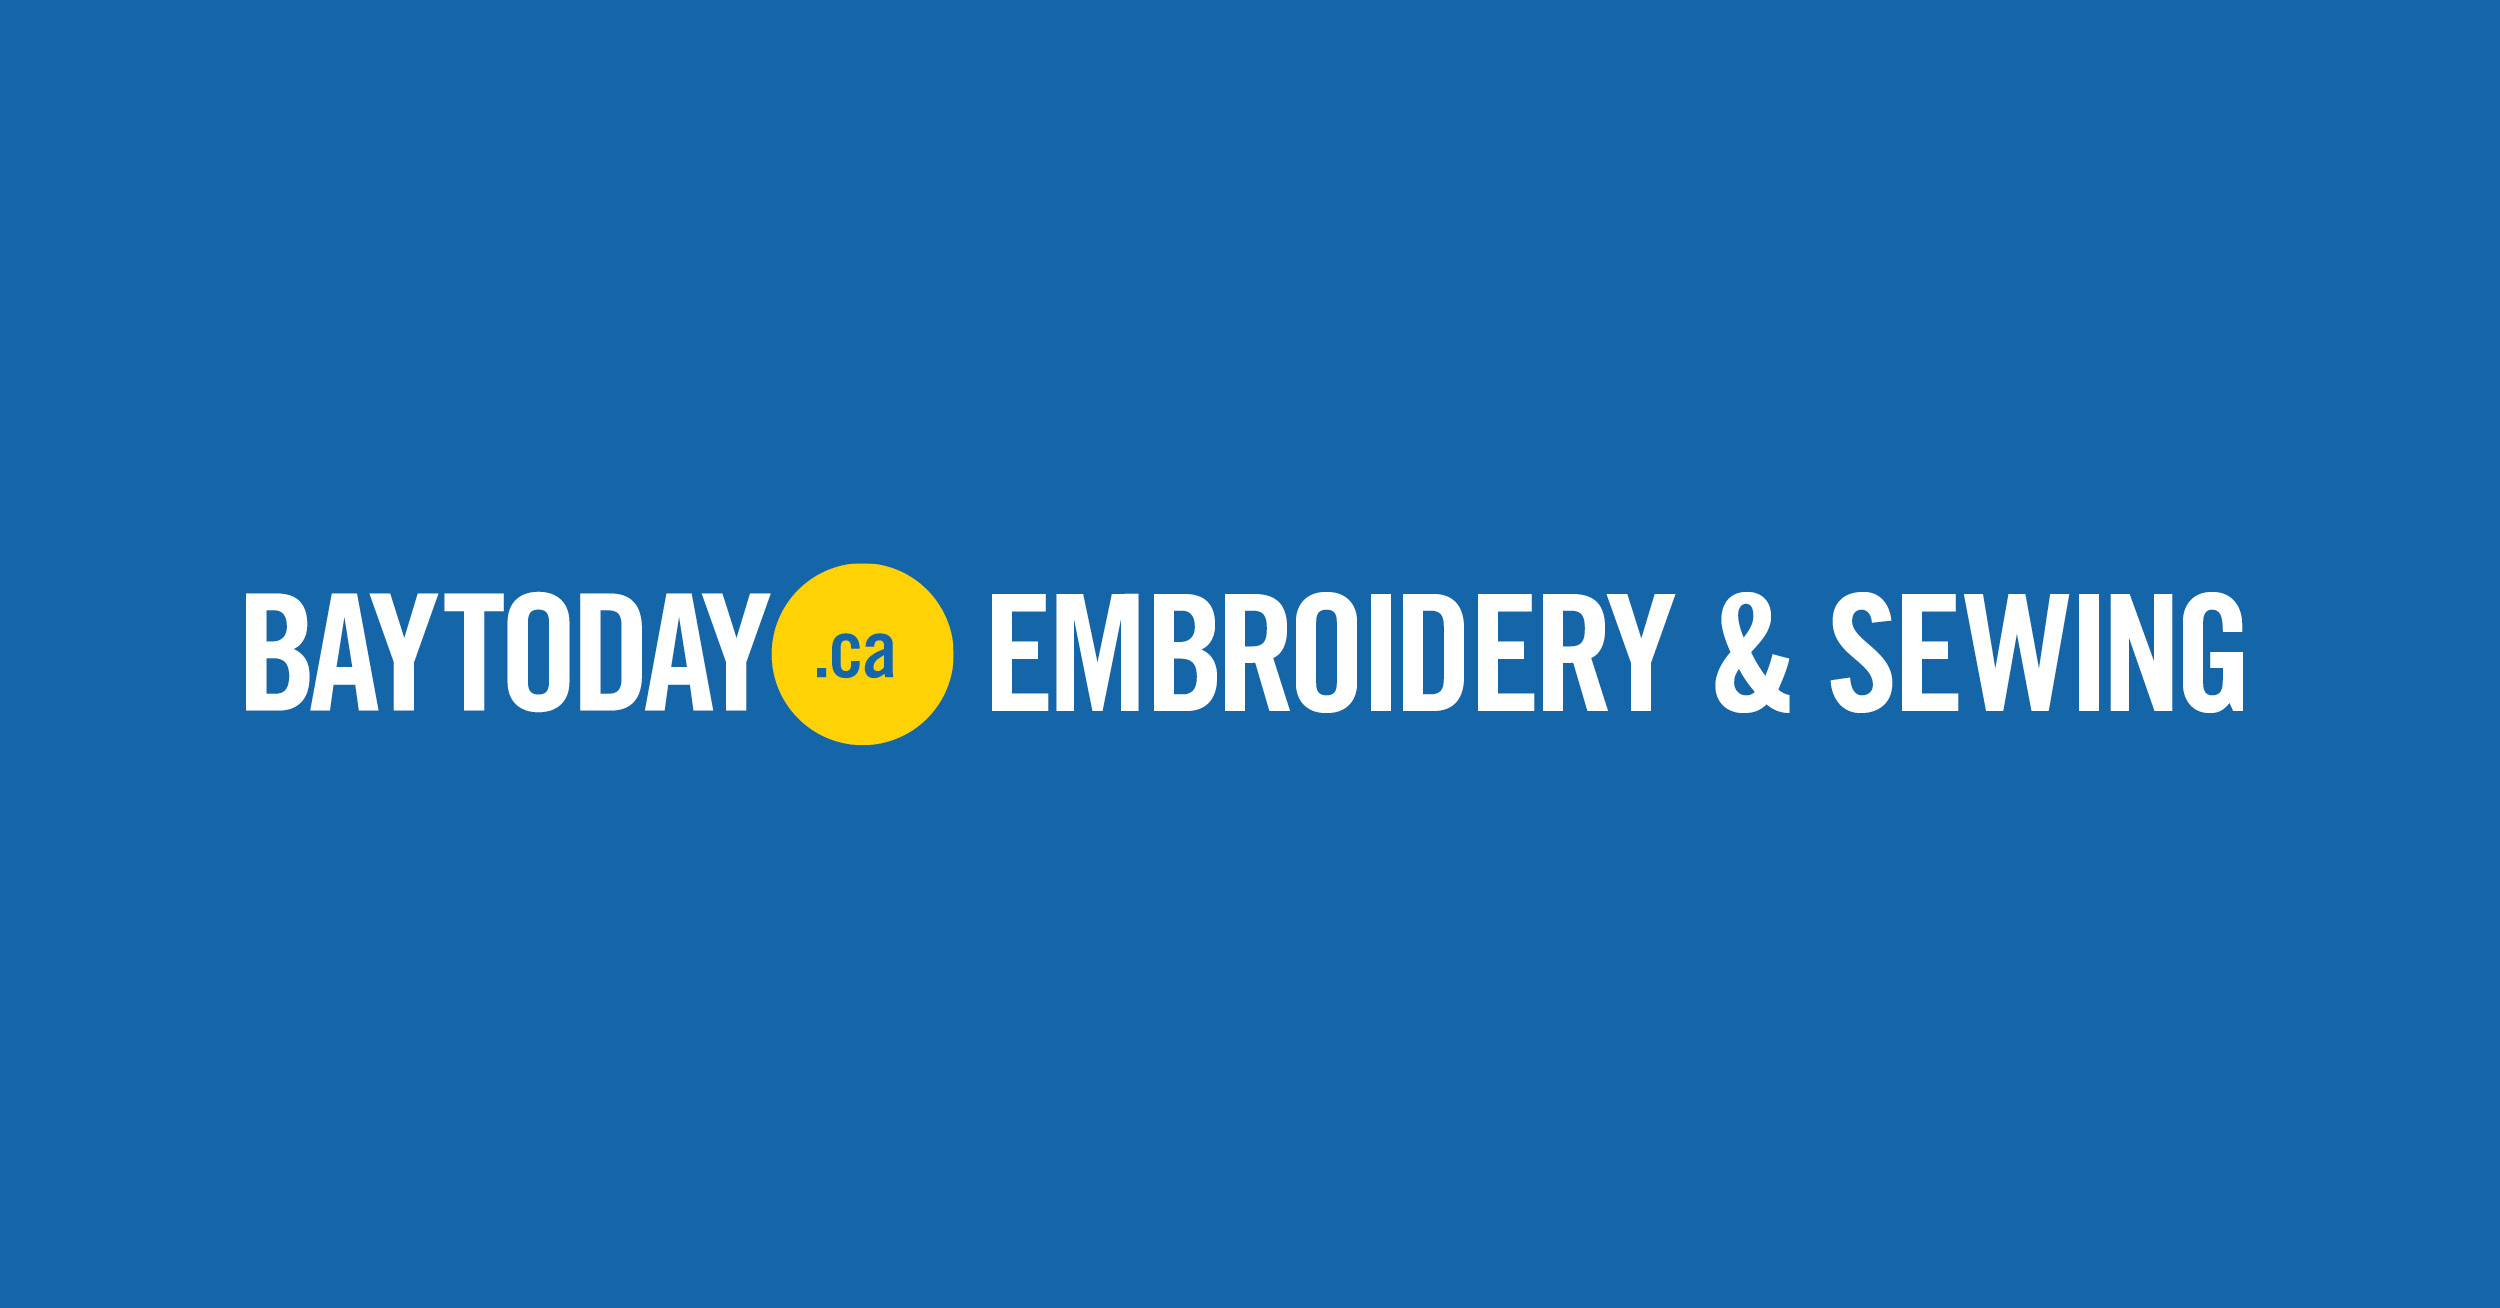 North Bay Embroidery and Sewing - North Bay News